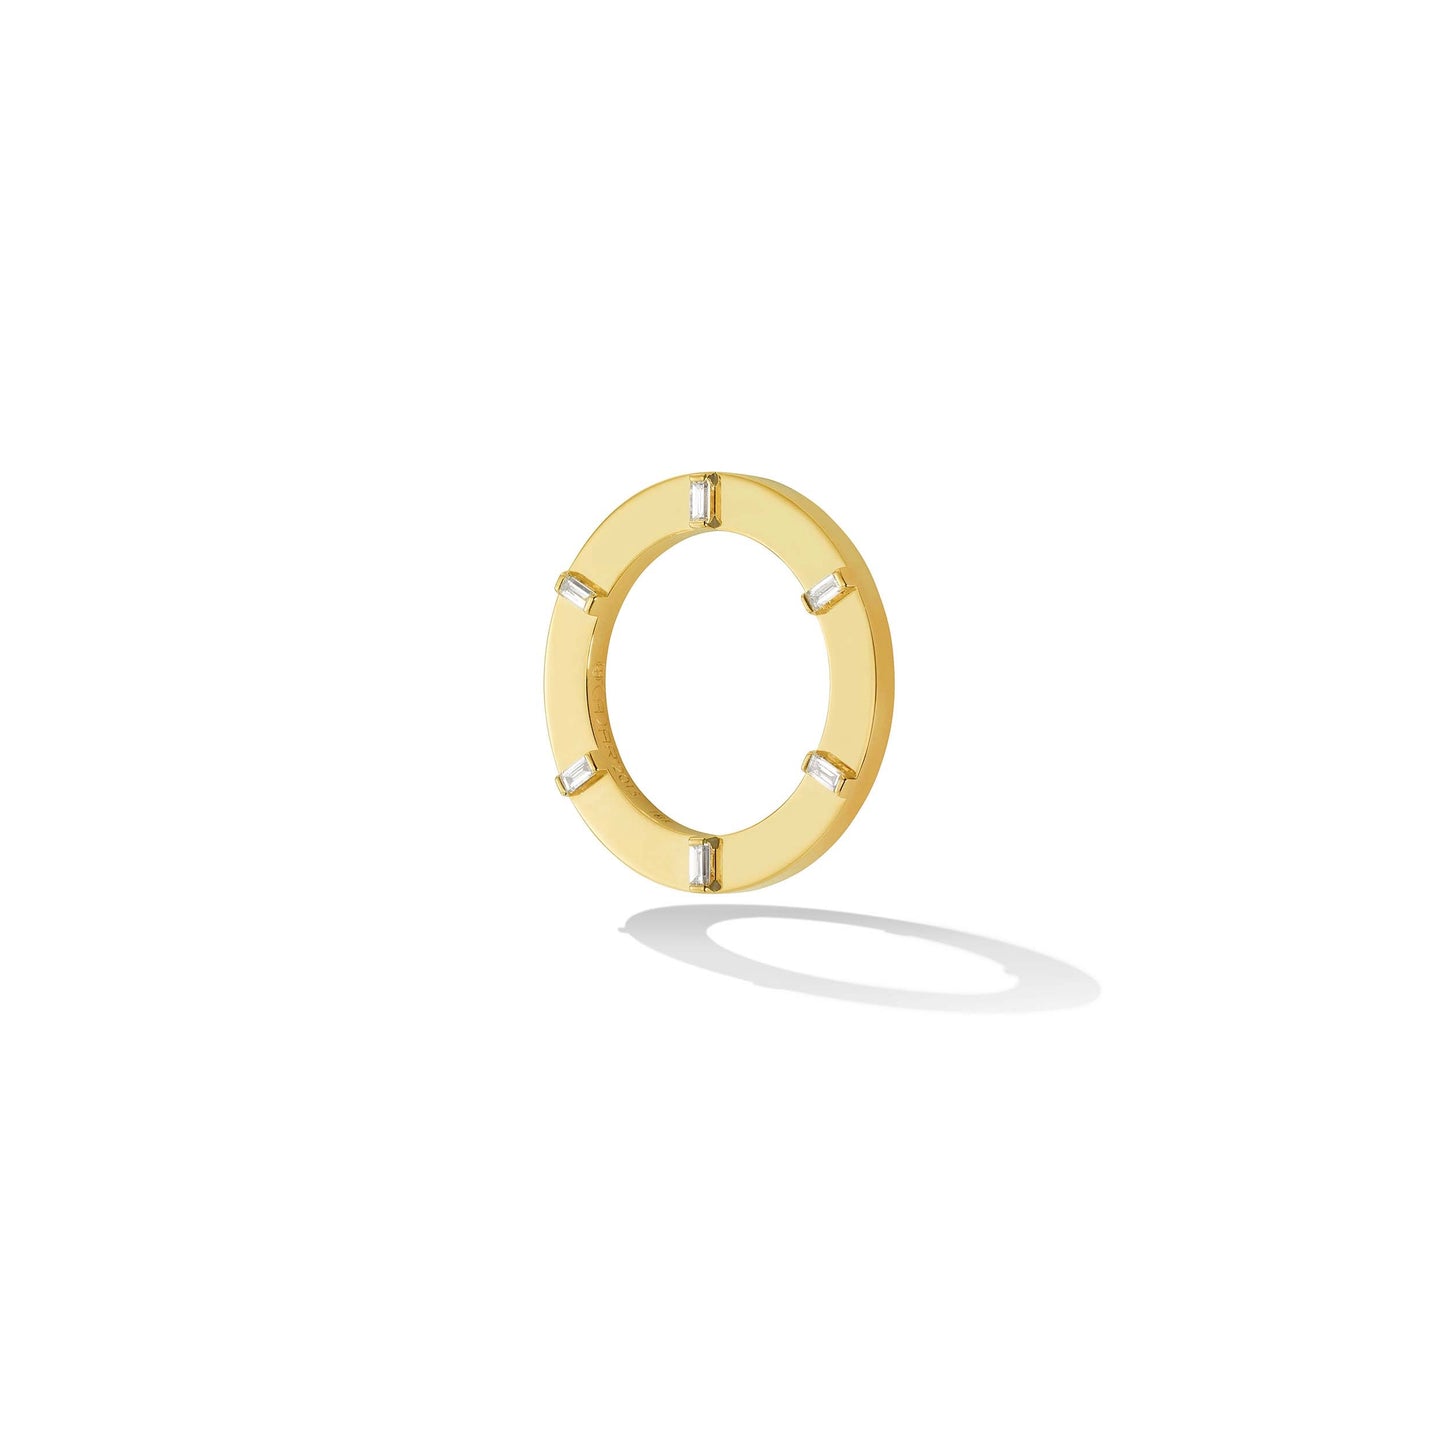 Yellow Gold Prime Stackable Ring with White Diamonds